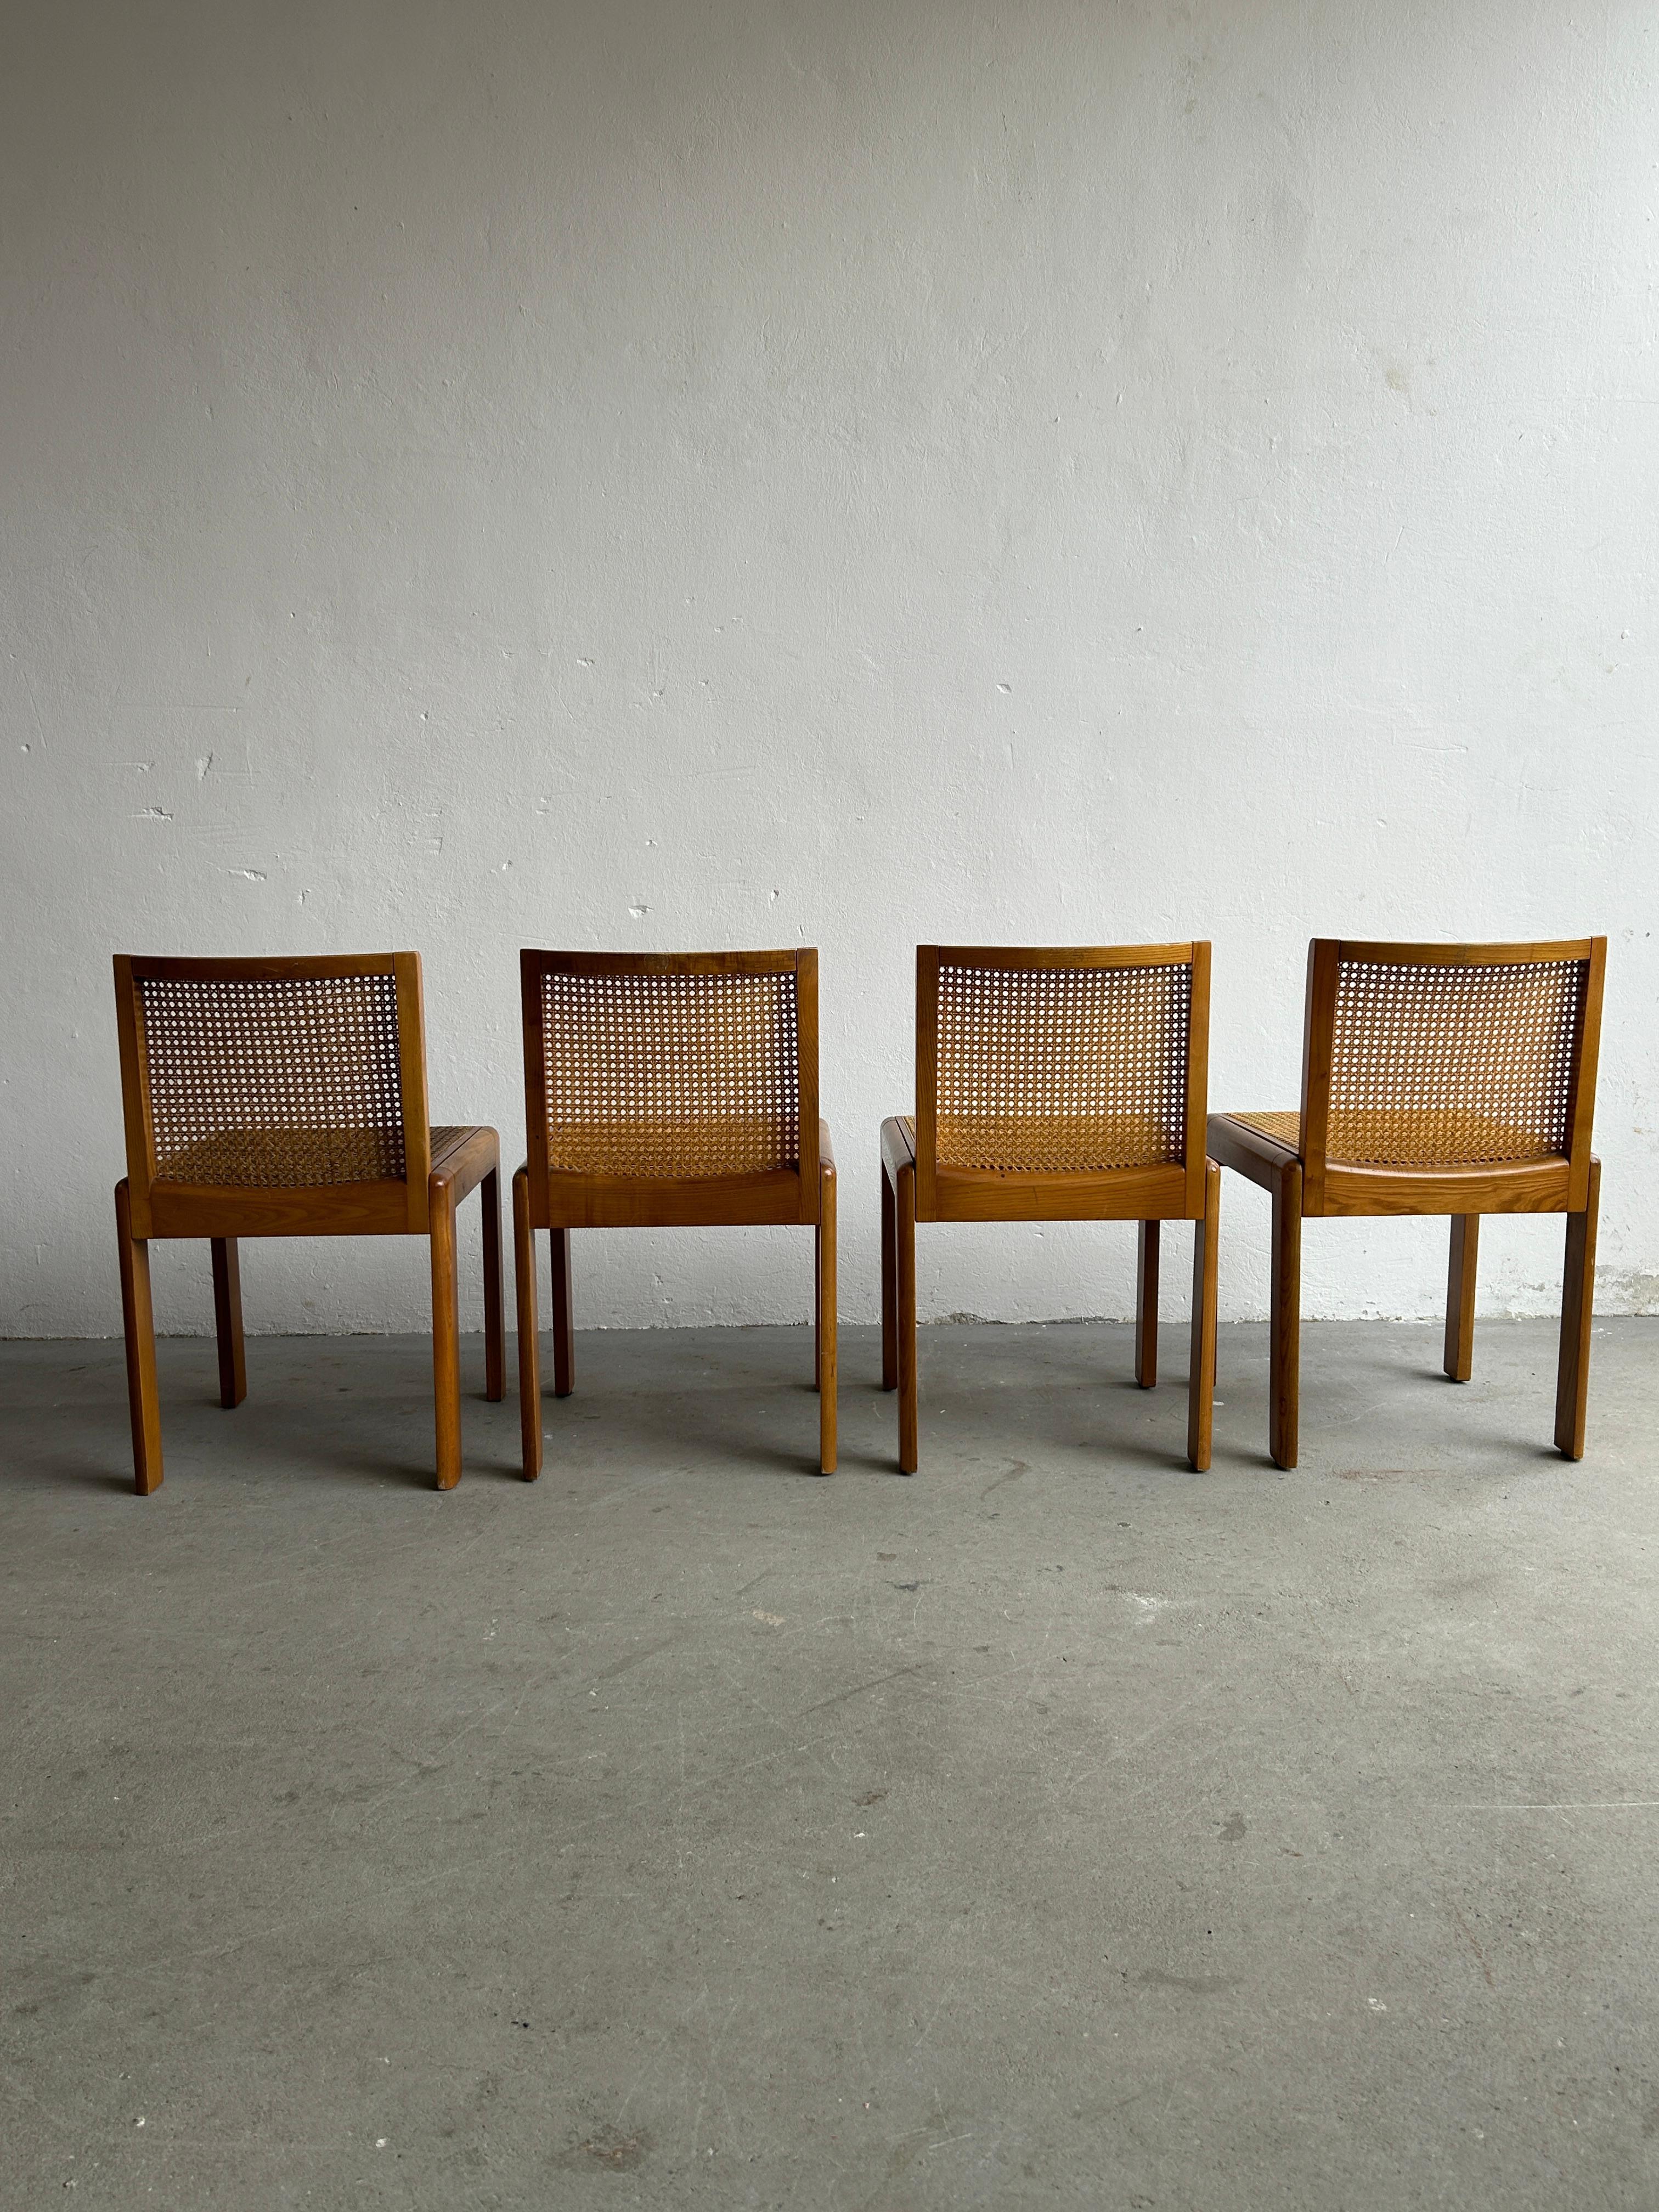 Vintage Italian 1970s Mid-Century Modern Wooden Dining Chairs in Oak and Cane 1